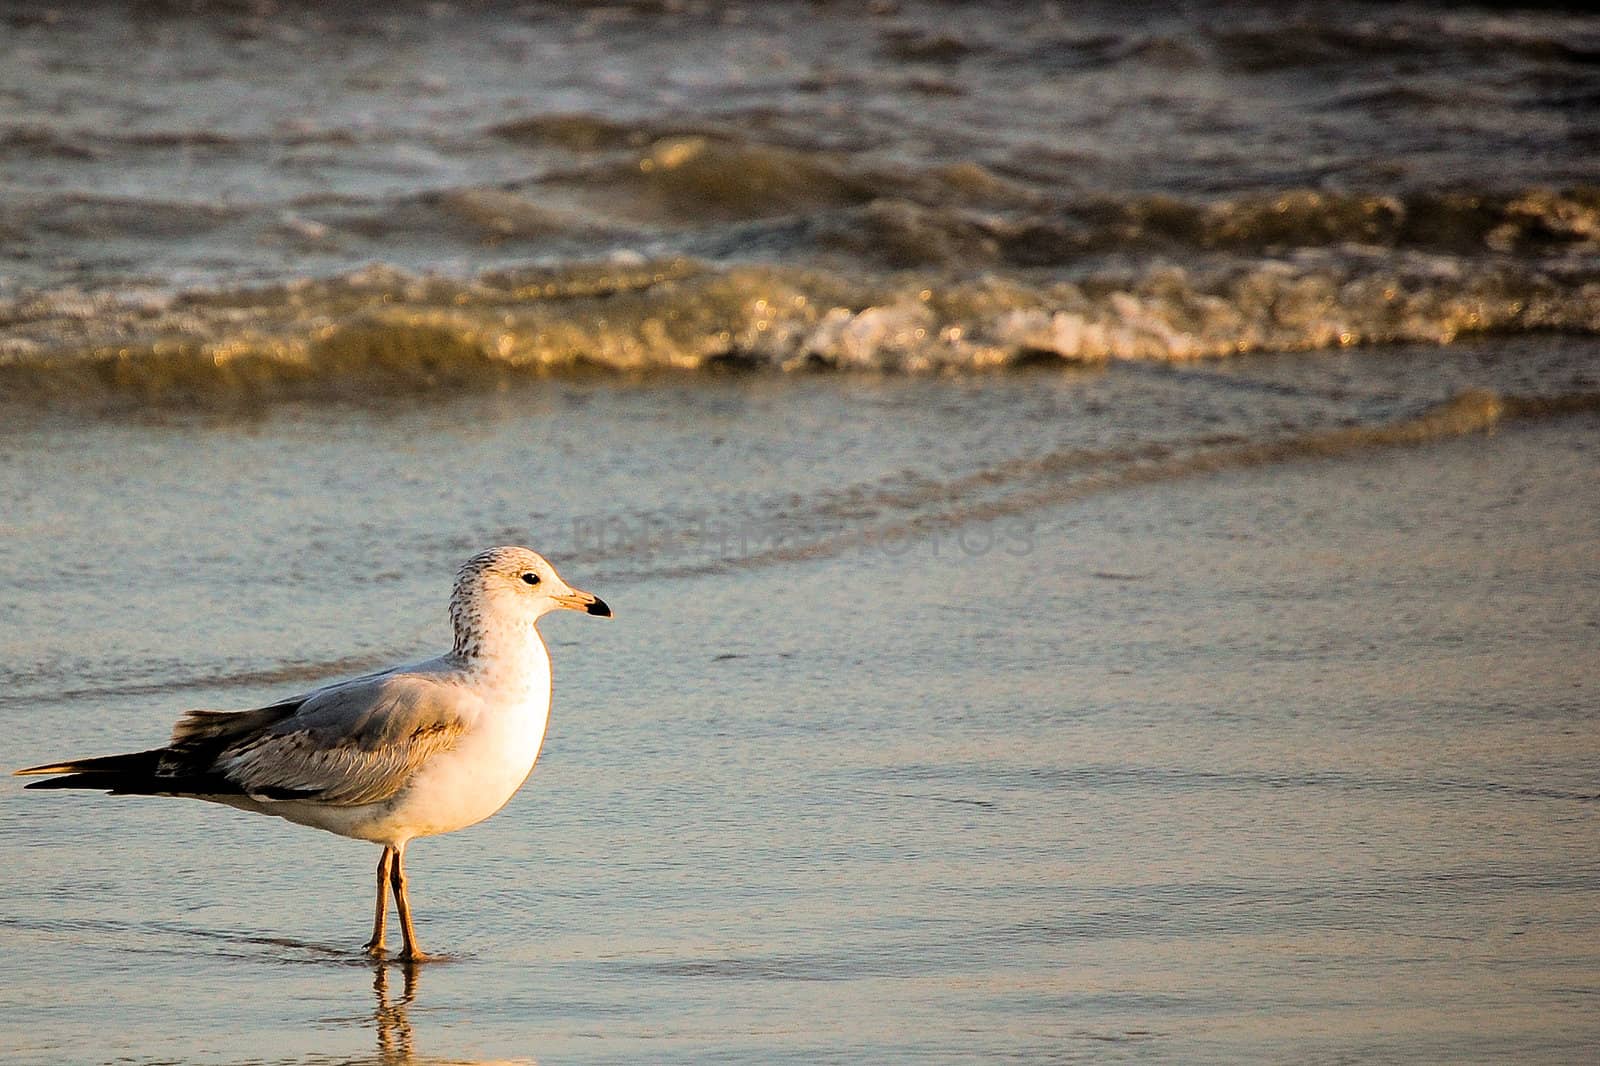 Bird on the Beach - Background Template by RefocusPhoto